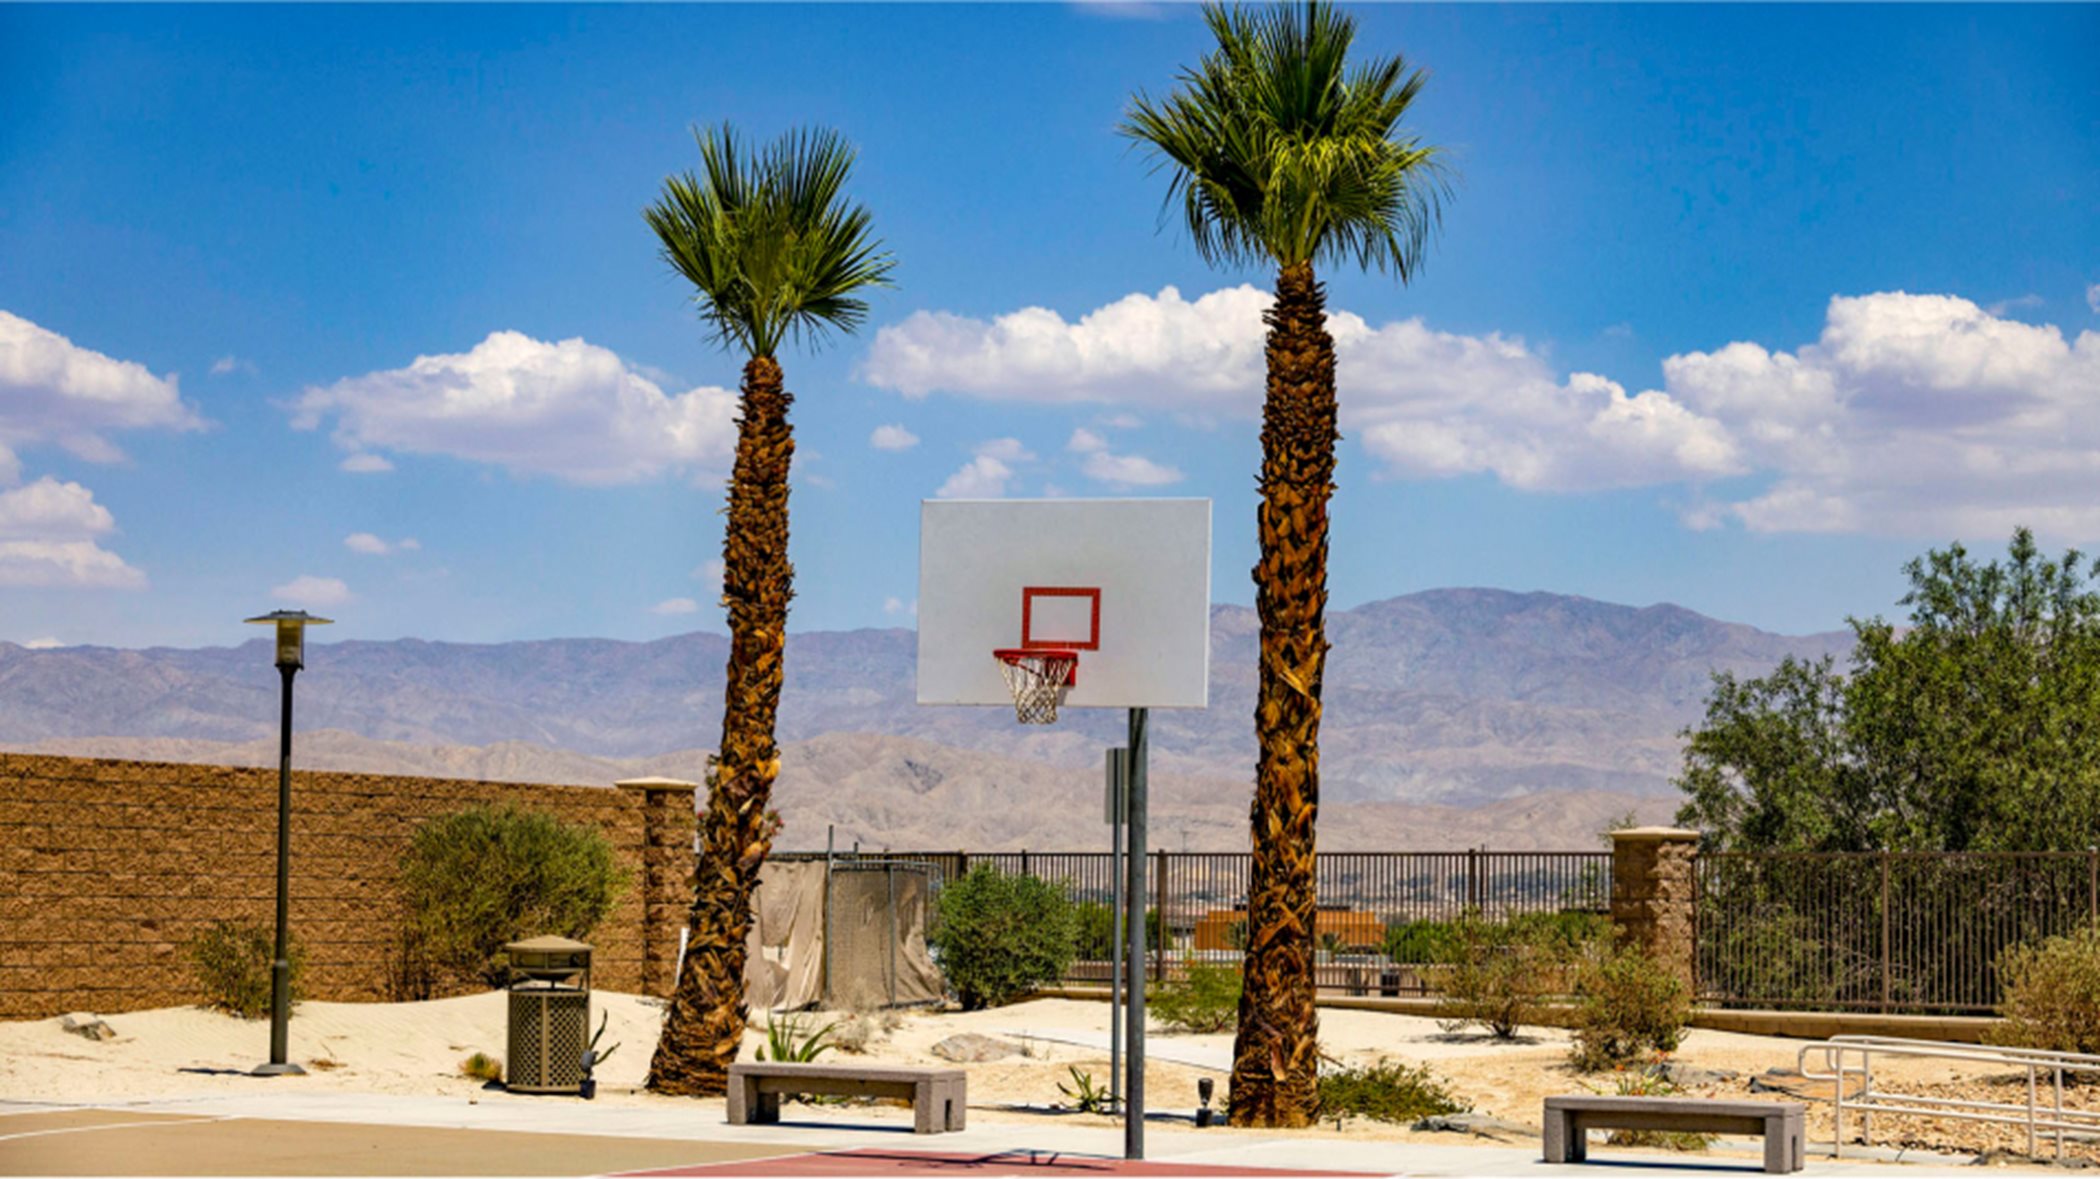 Basketball hoop with a palm tree on either side